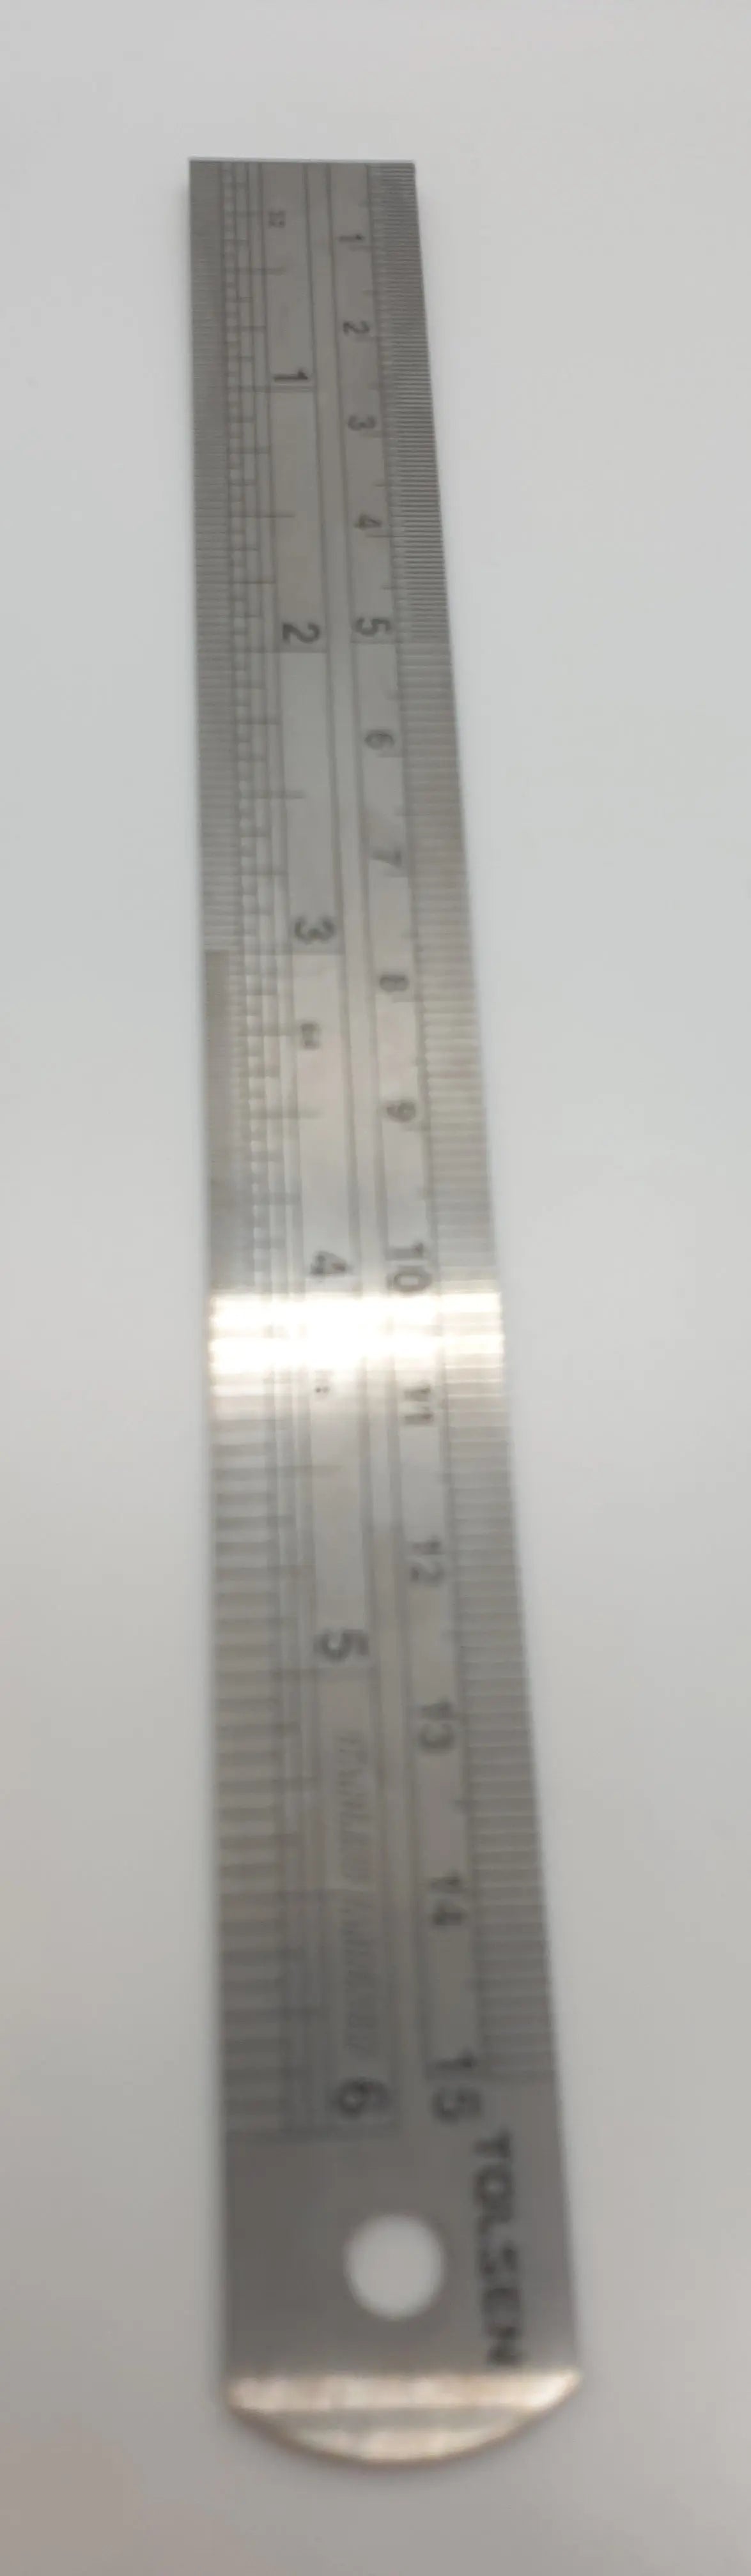 150mm Ruler for adding scale to your finds pictures No Contact